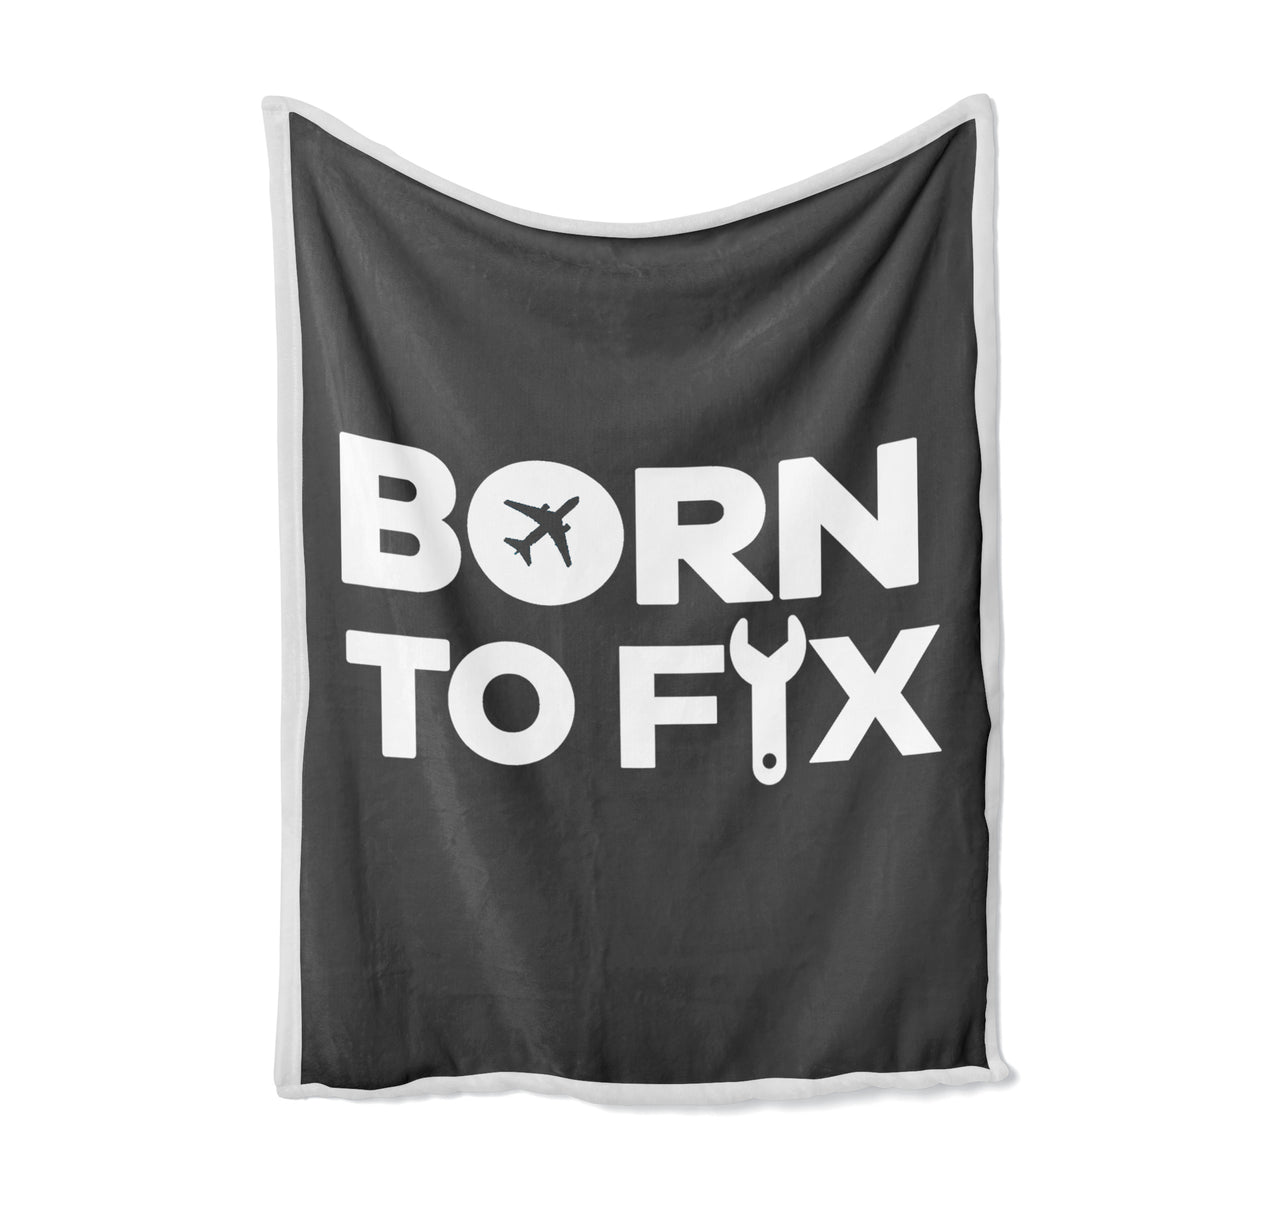 Born To Fix Airplanes Designed Bed Blankets & Covers